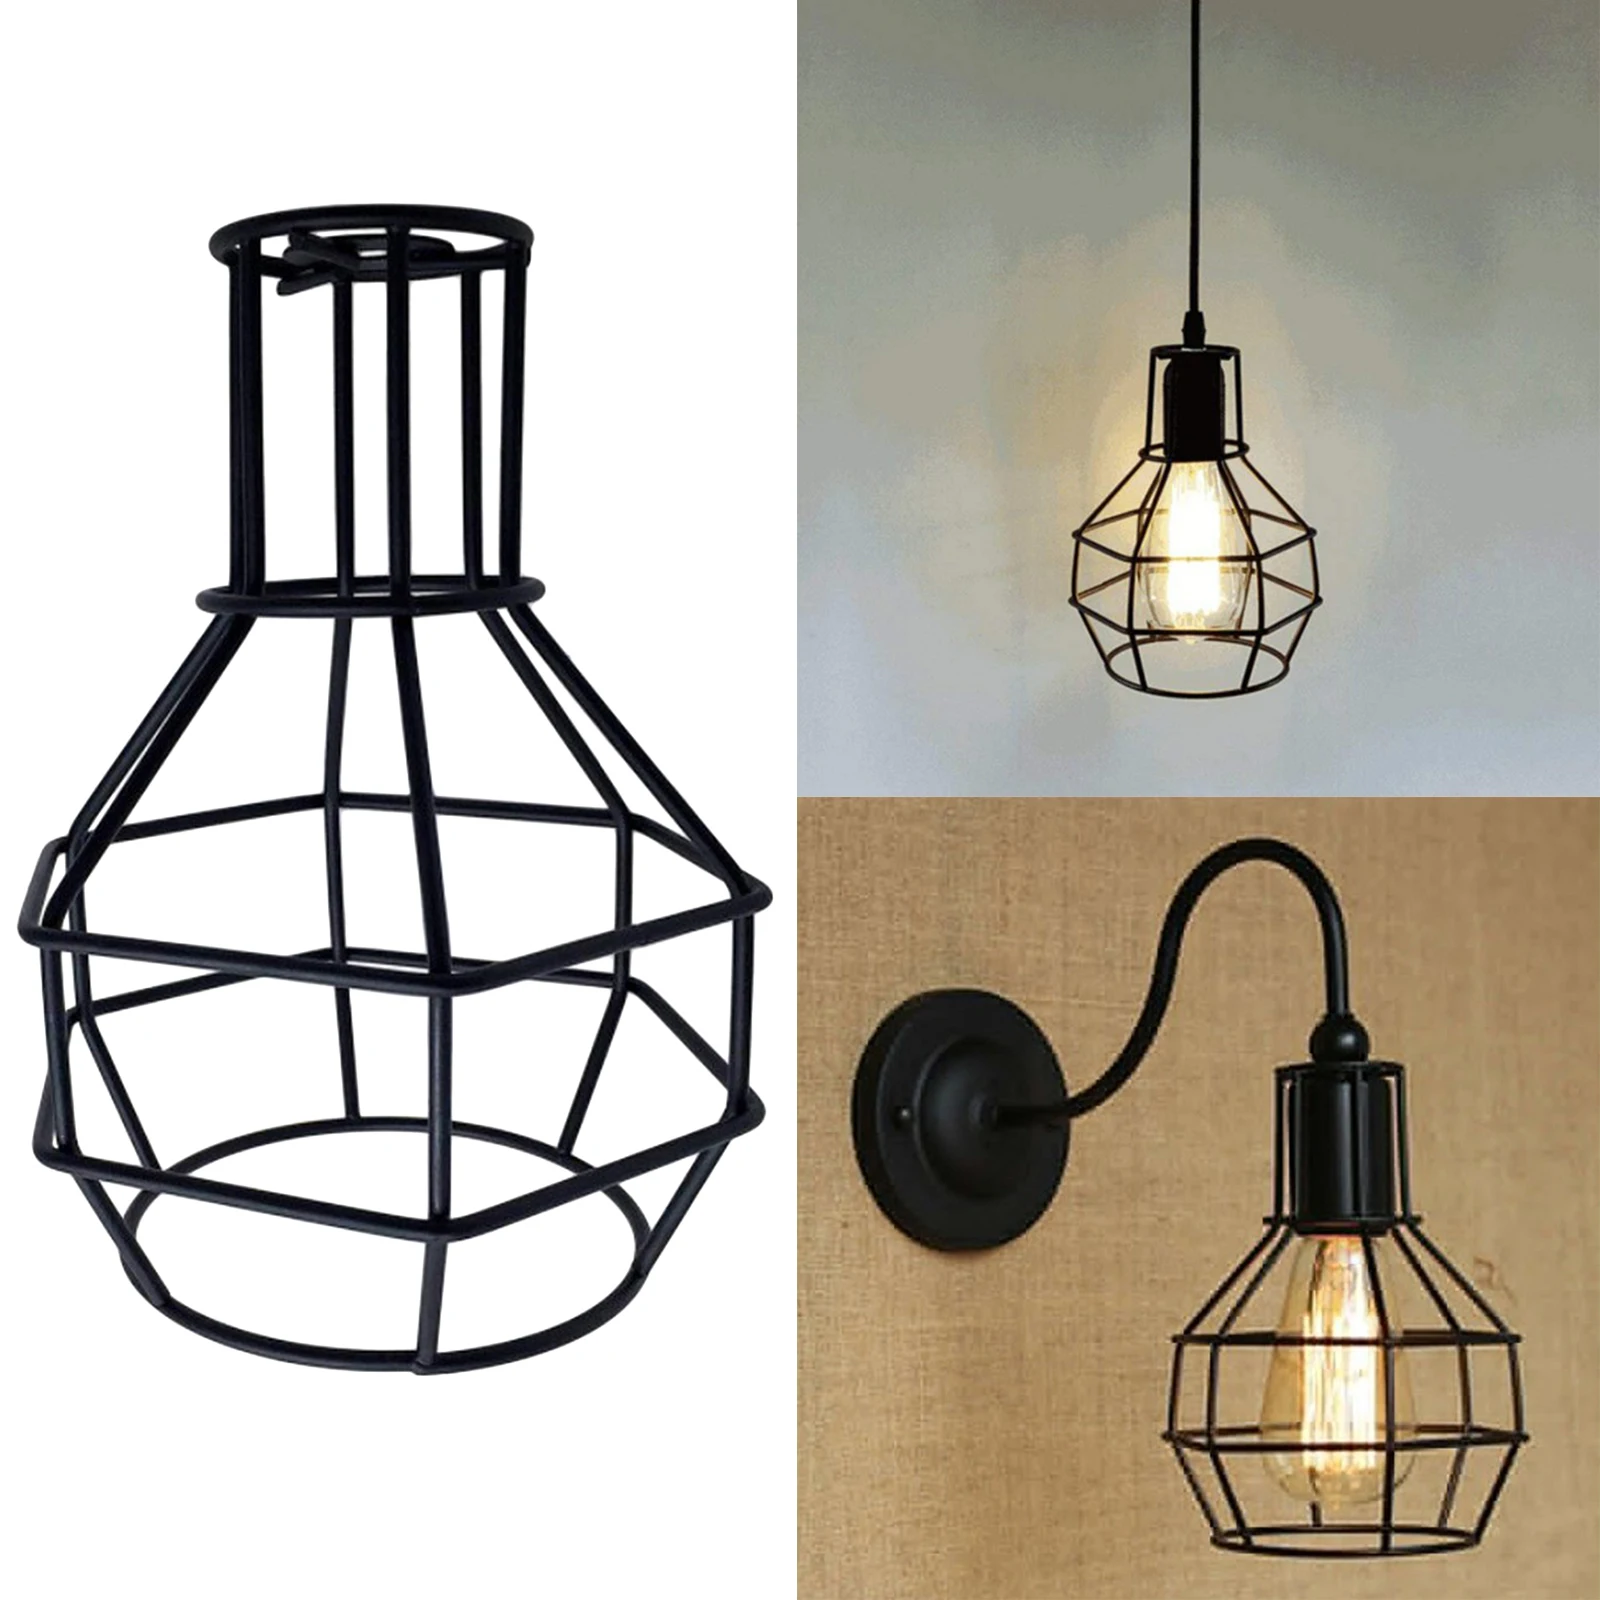 Vintage Style Retro Industrial Loft Iron Ceiling Cage Light Pendant Lamp Shade for Home Bedroom Living Room Decor